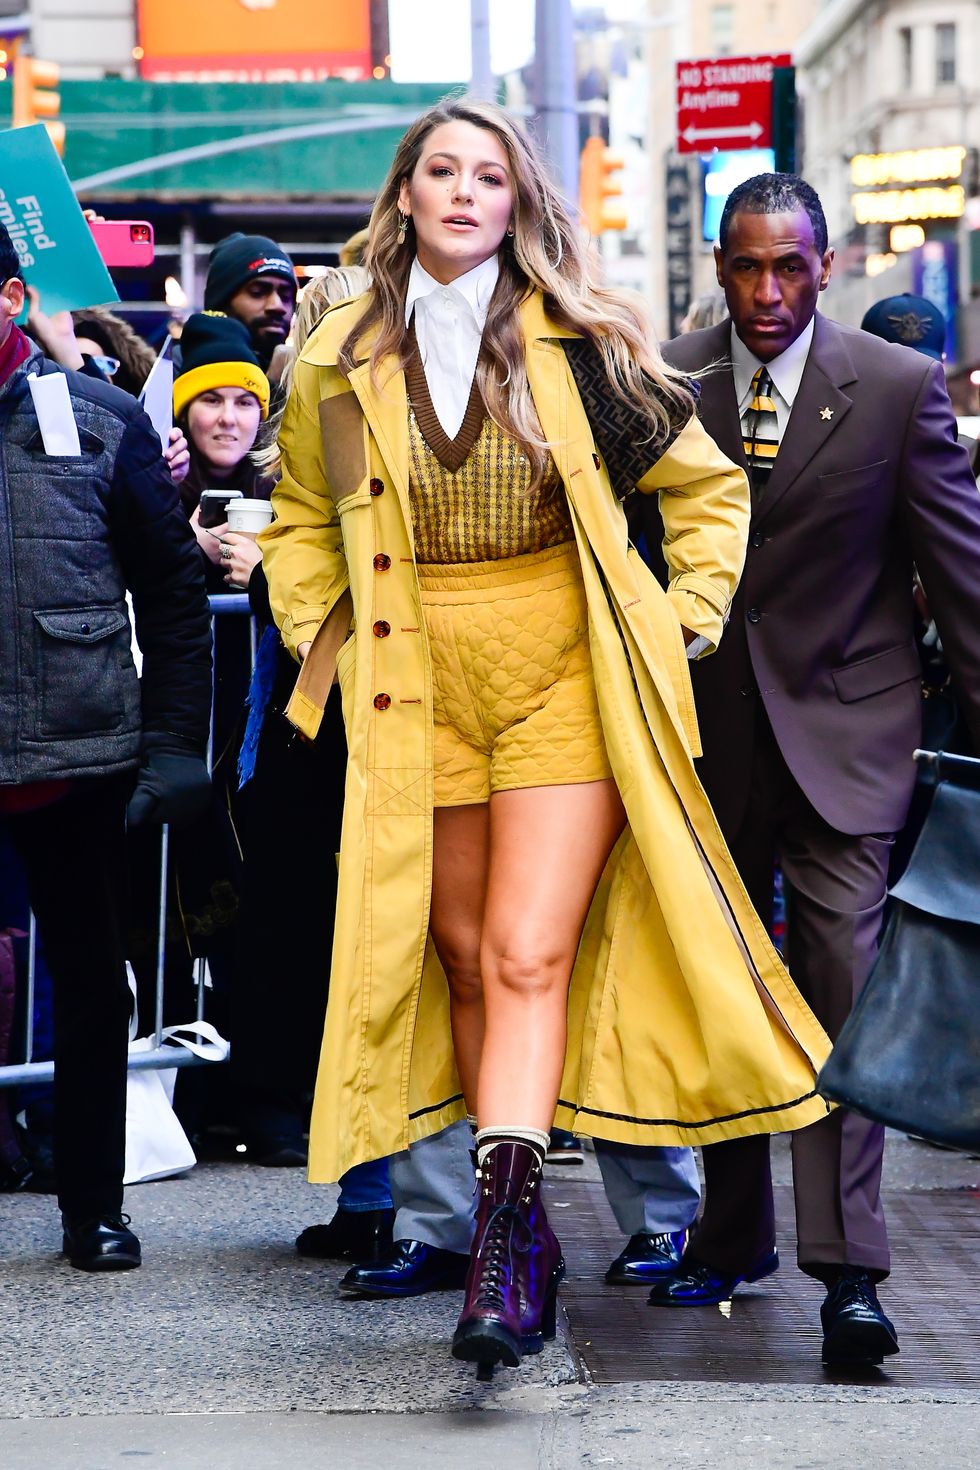 Emily in Paris' Season 2 Featured an Iconic Blake Lively Fashion Moment